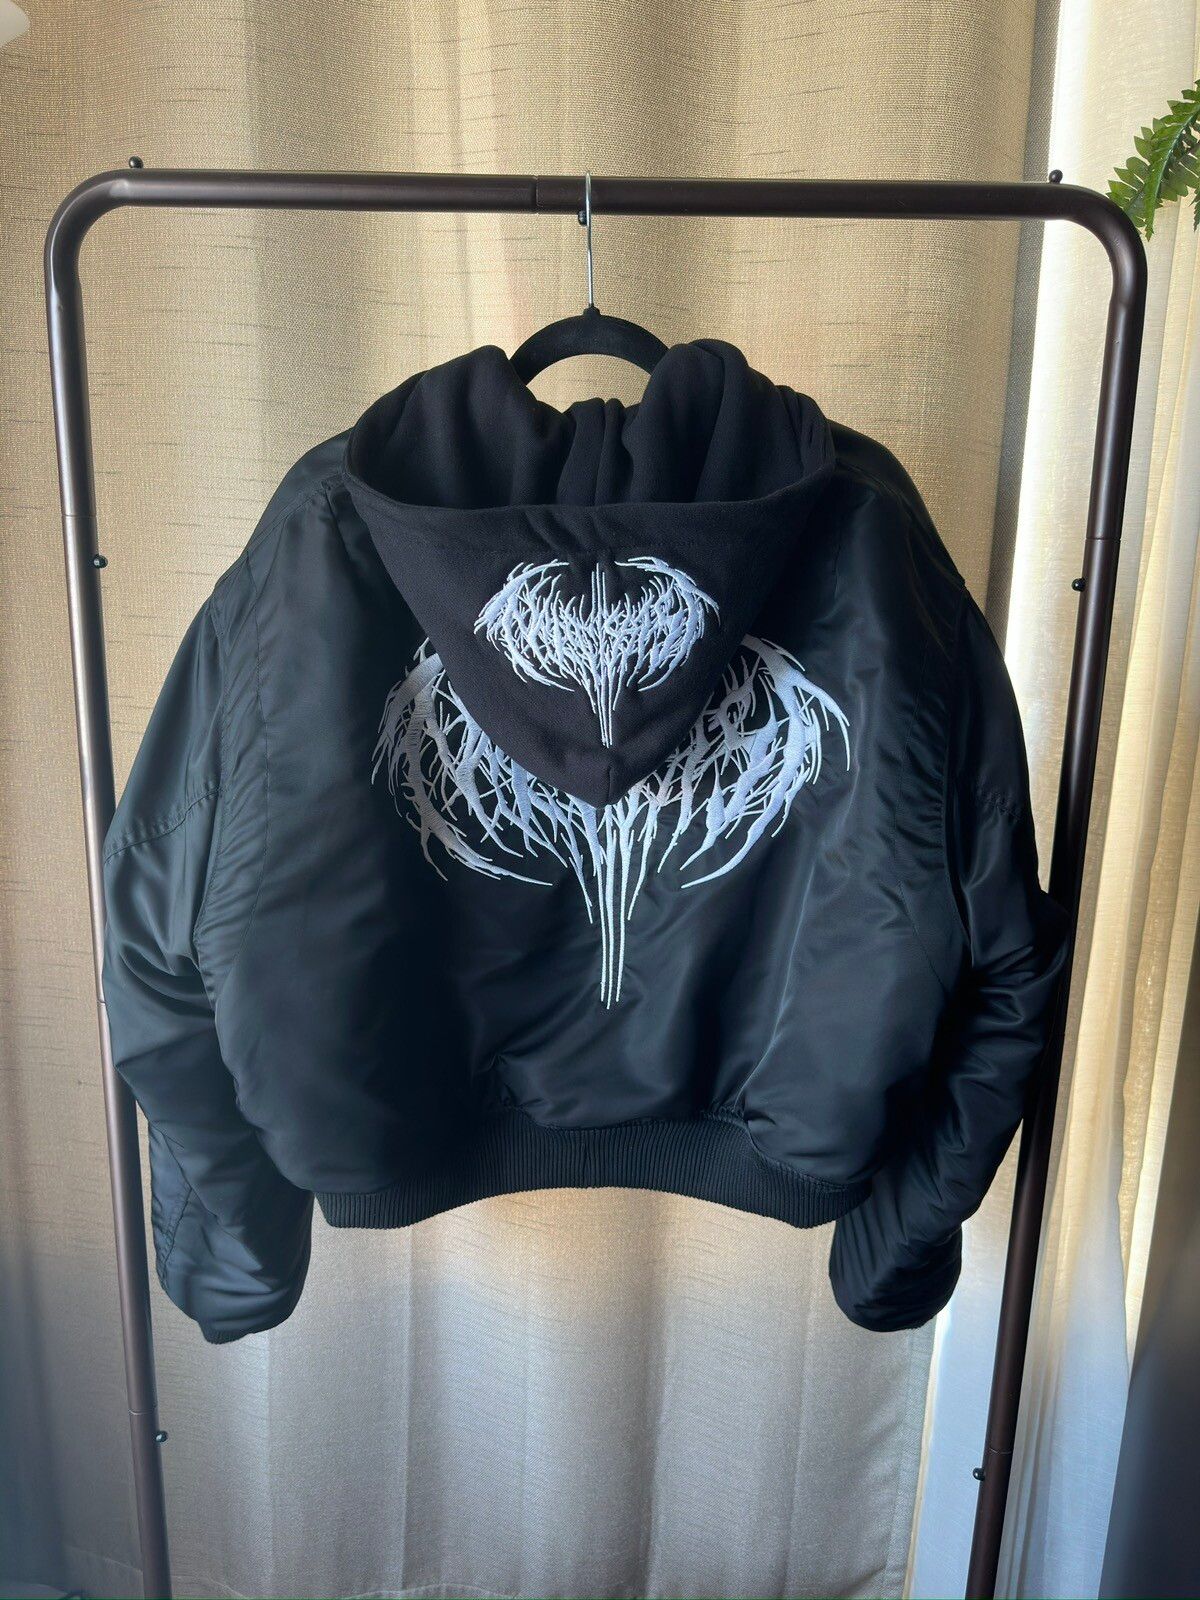 Playboi Carti Narcissist Hooded Bomber | Grailed